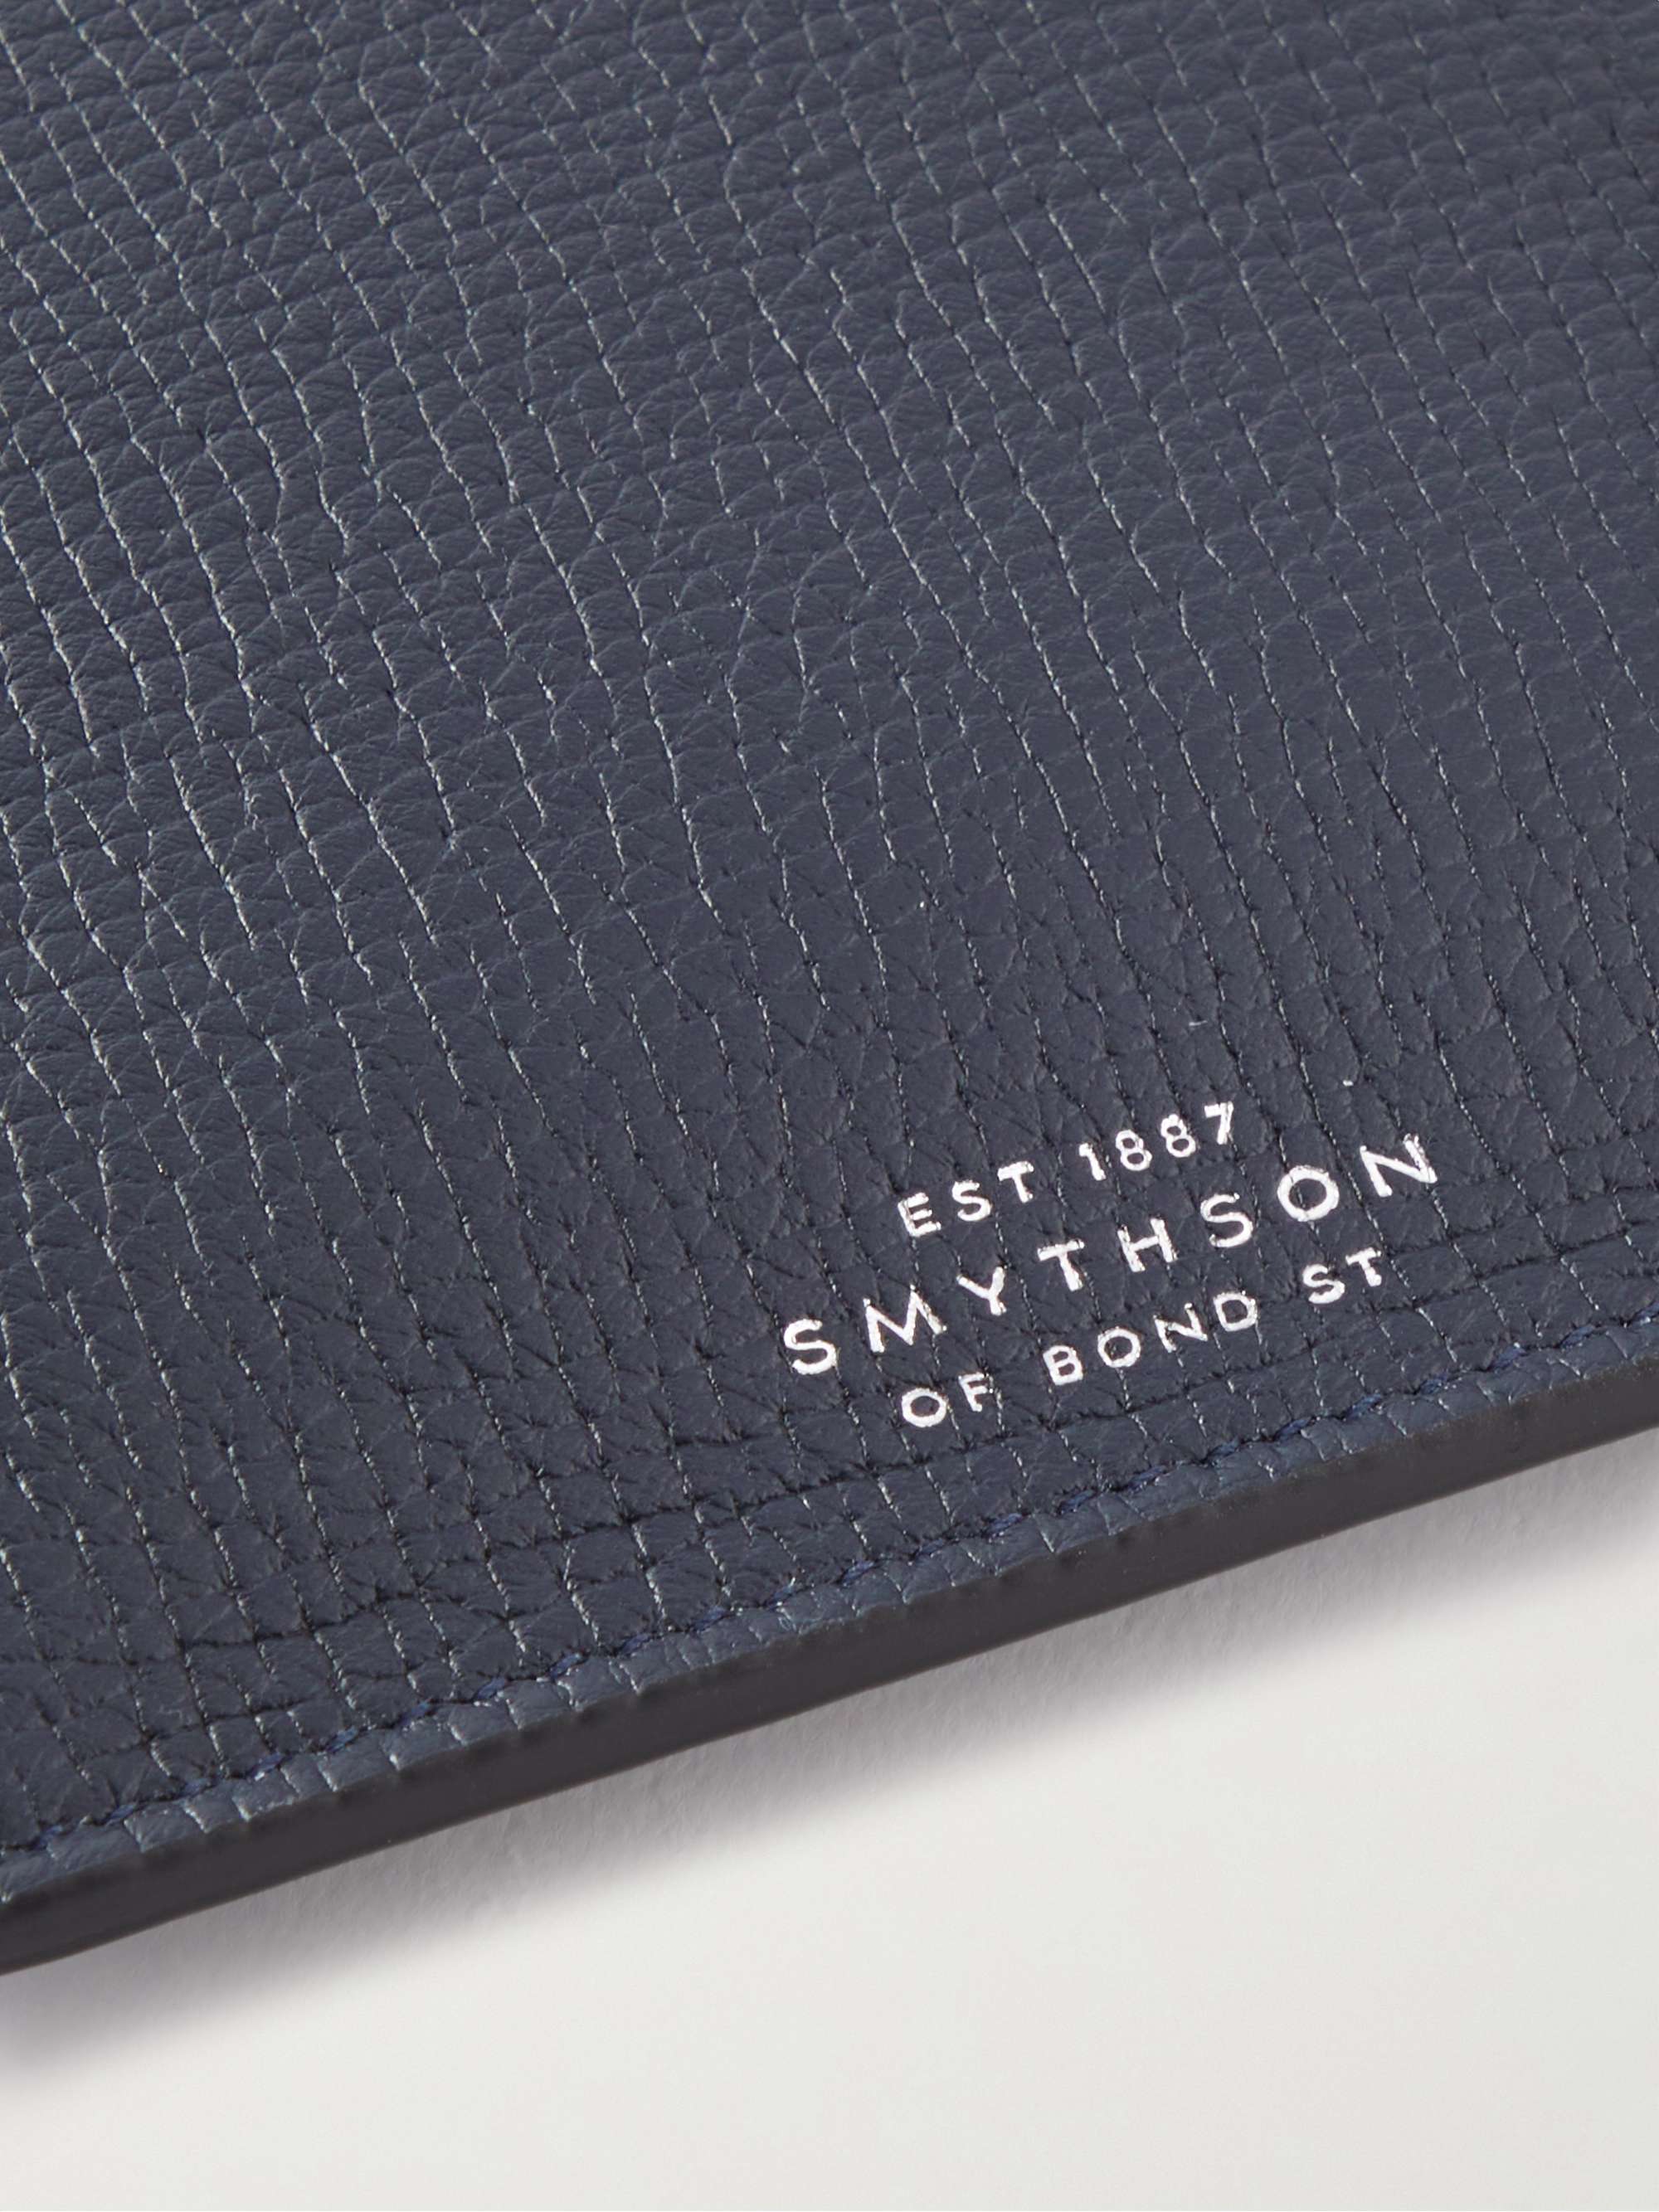 SMYTHSON Ludlow Full-Grain Leather Pouch